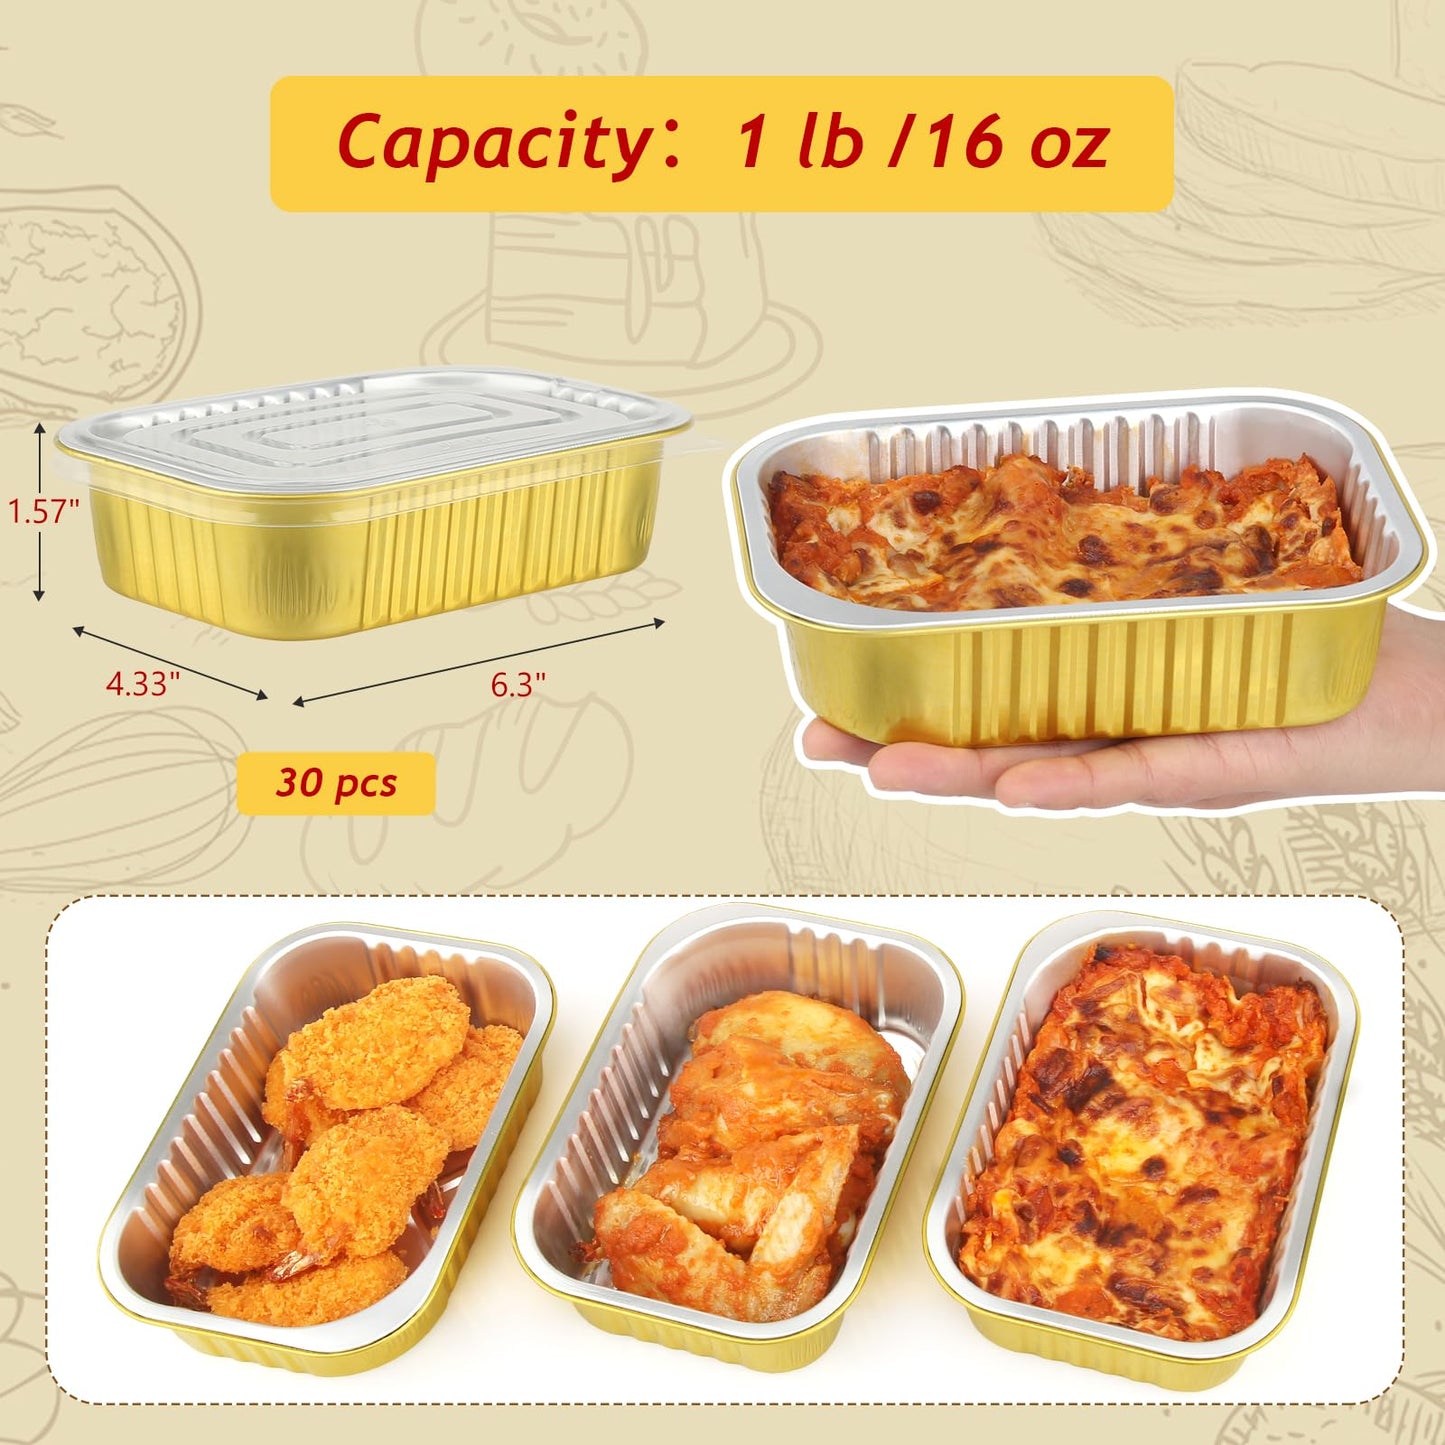 LNYZQUS 1lb Small Aluminum Pans With Lids 30 Pack, 16oz Foil Baking Tins Leftover Containers Takeout To Go Food Containers With PP Covers,Disposable Individual Pie Cake Pans Holders